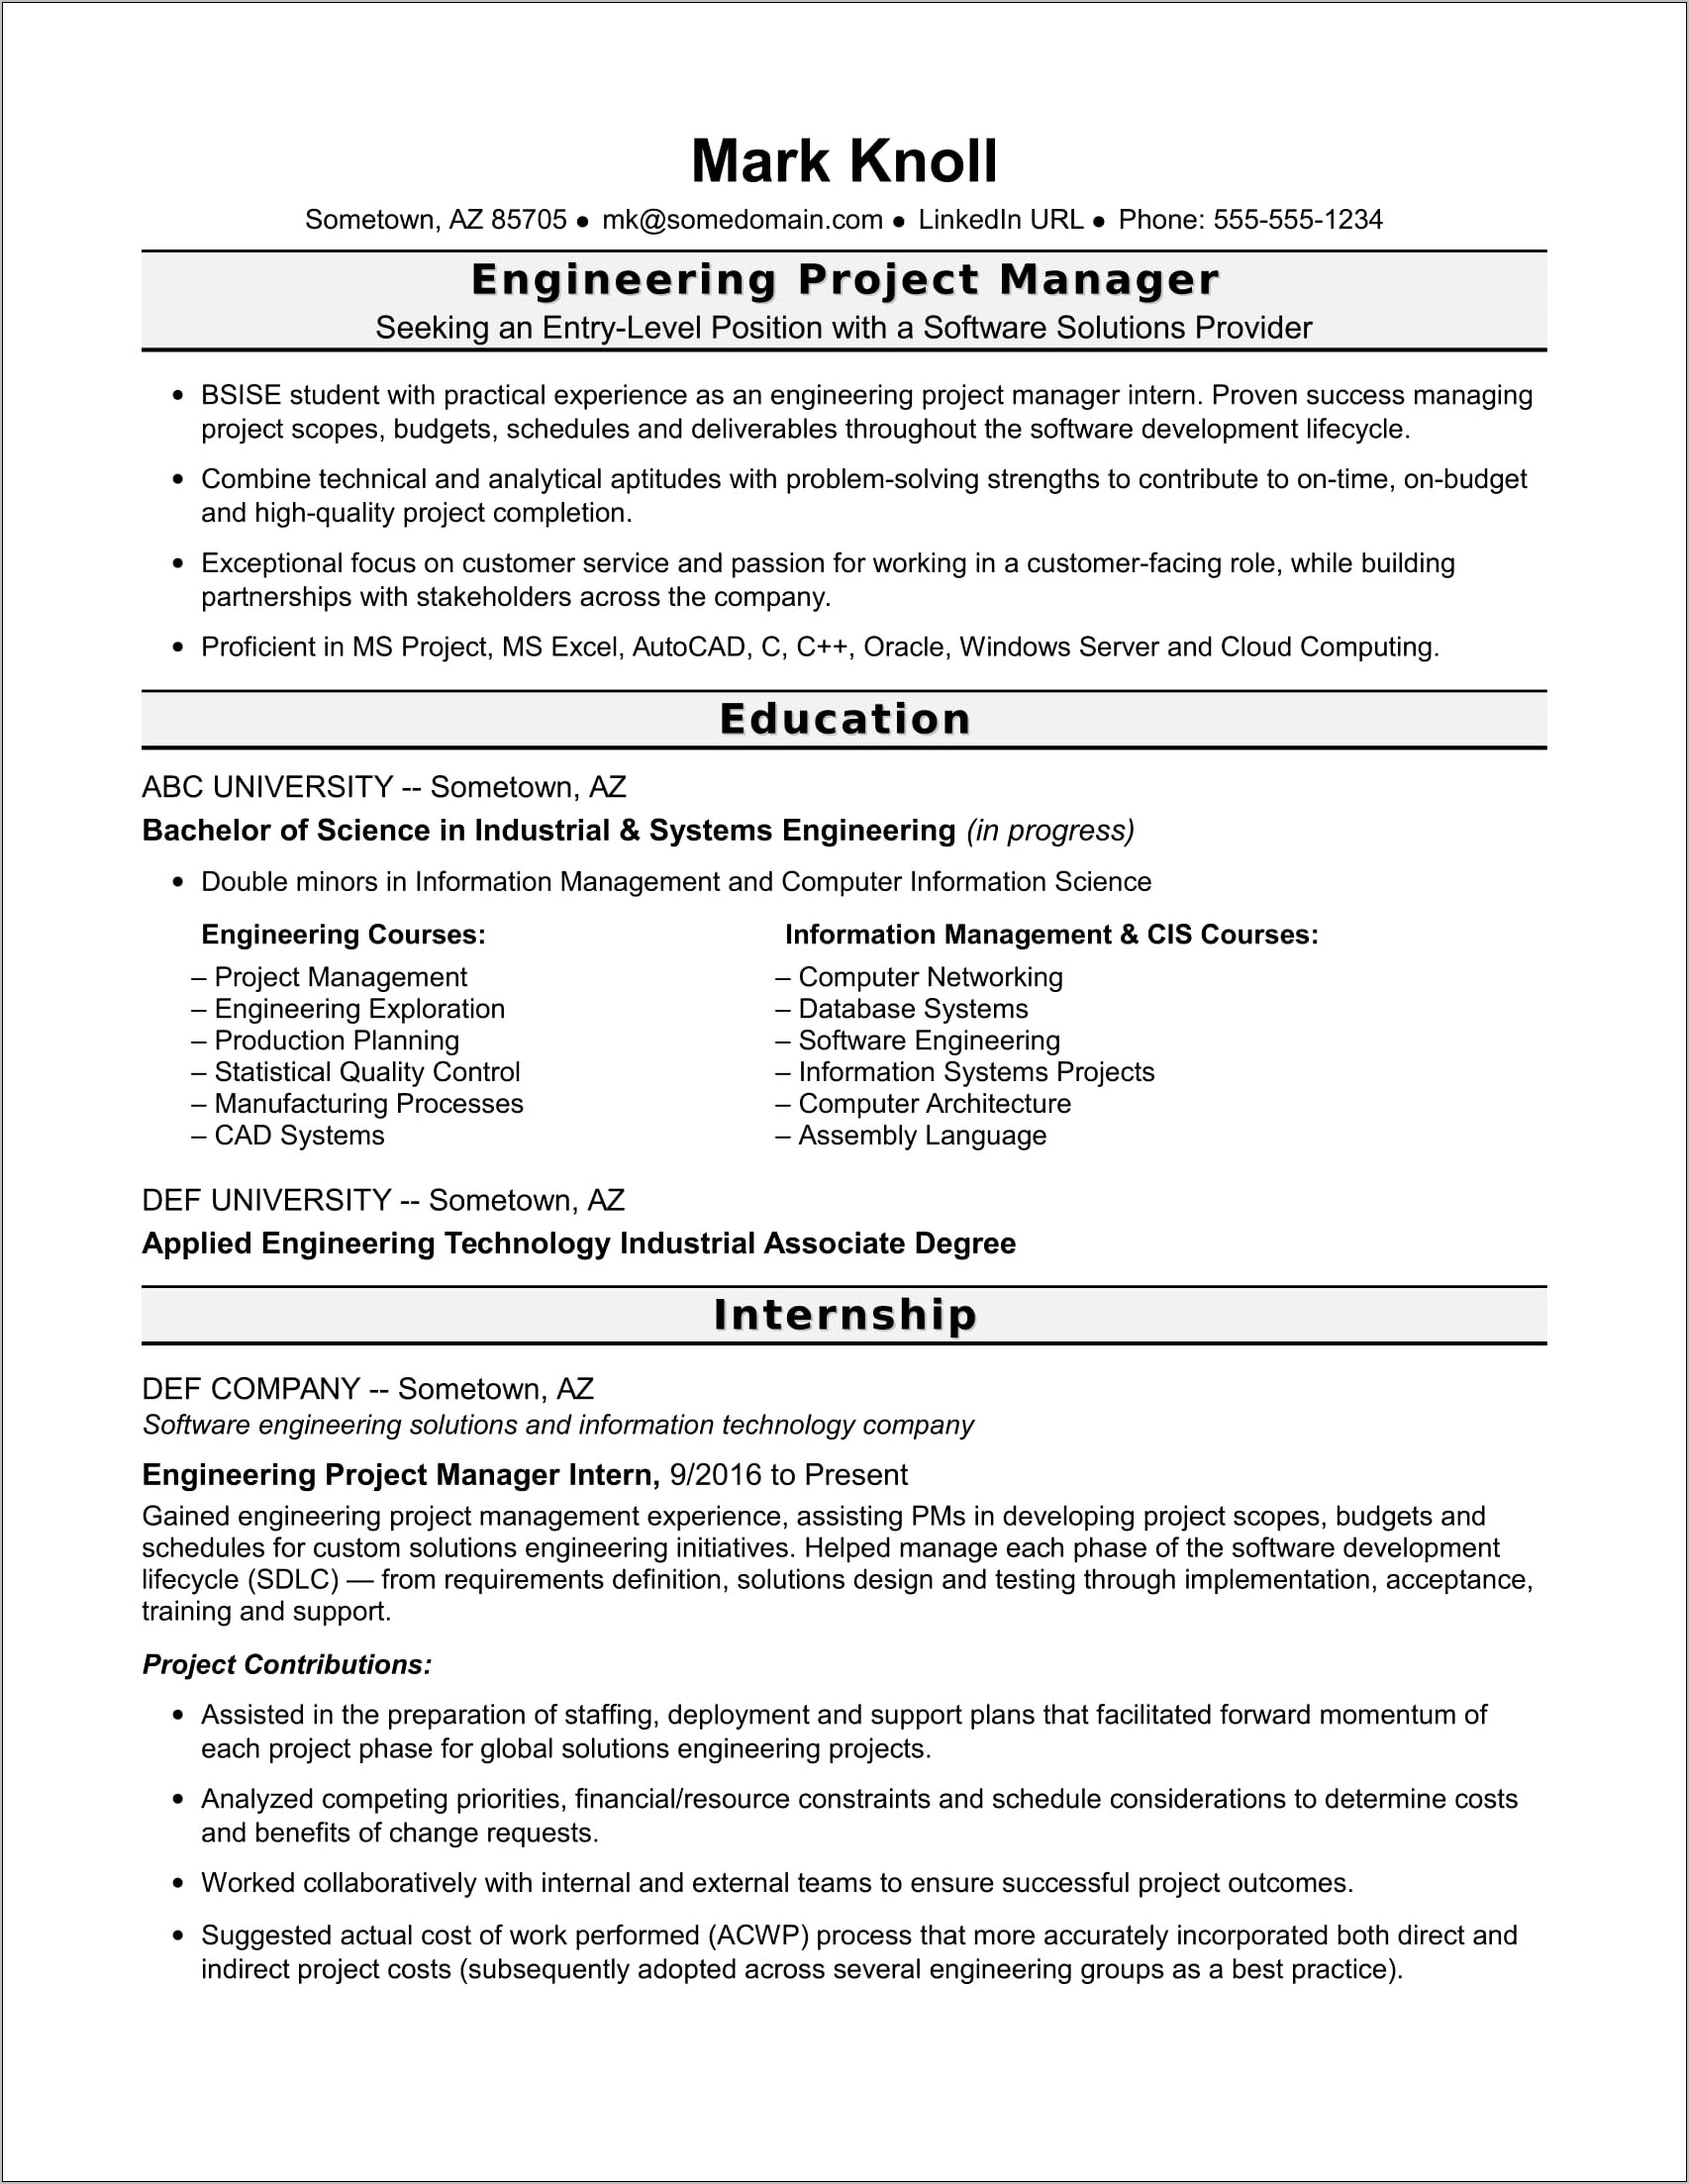 Sample Resume For Computer Science Student Fresher